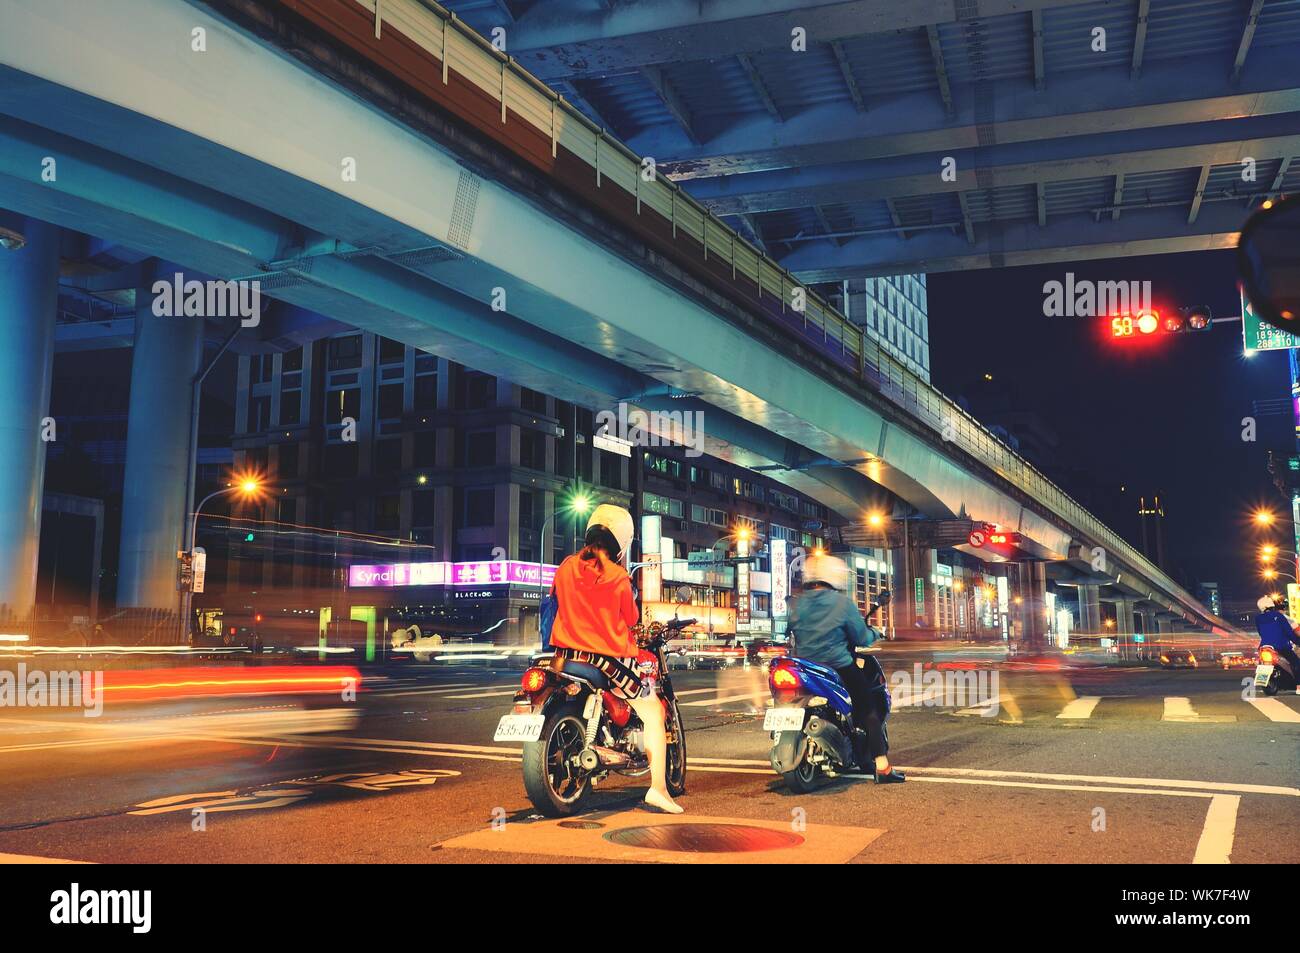 Rear View Of People Riding Motor Vehicles On Road At Night Stock Photo